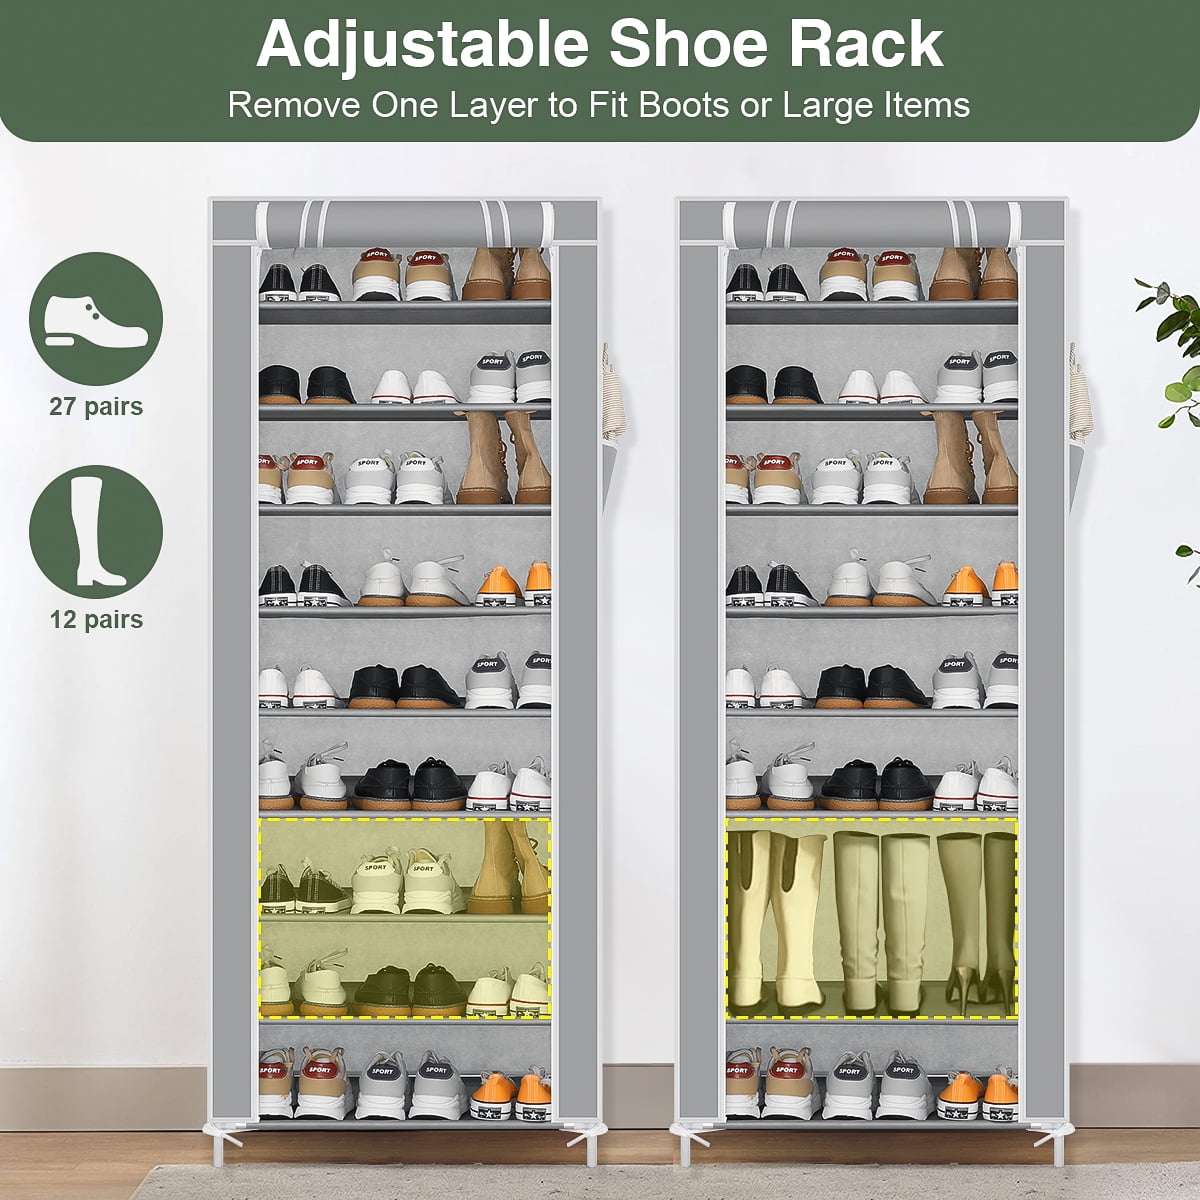 SONGMICS Shoe Rack, 9 Tier Shoe Organizer with Nonwoven Fabric Cover, Shoe  Storage Shelf for 40-50 Pairs of Shoes, Entryway, Suitable for Sneakers,  High Heels, …